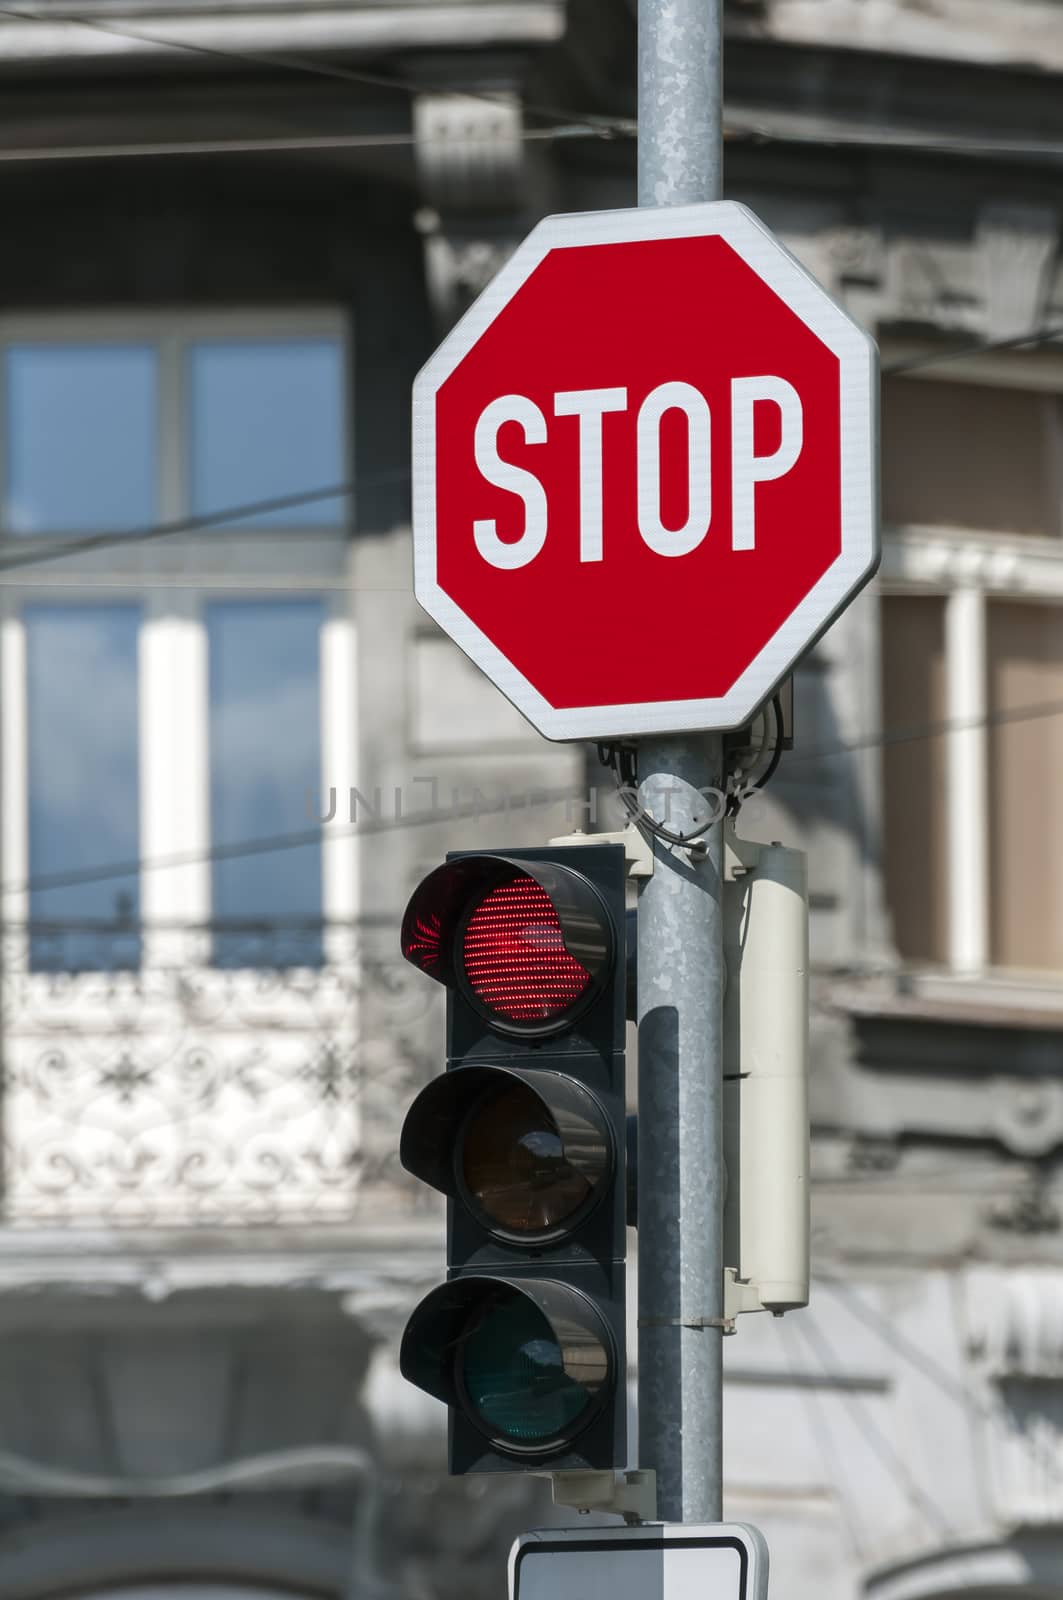 Red traffic light on and stop sign.